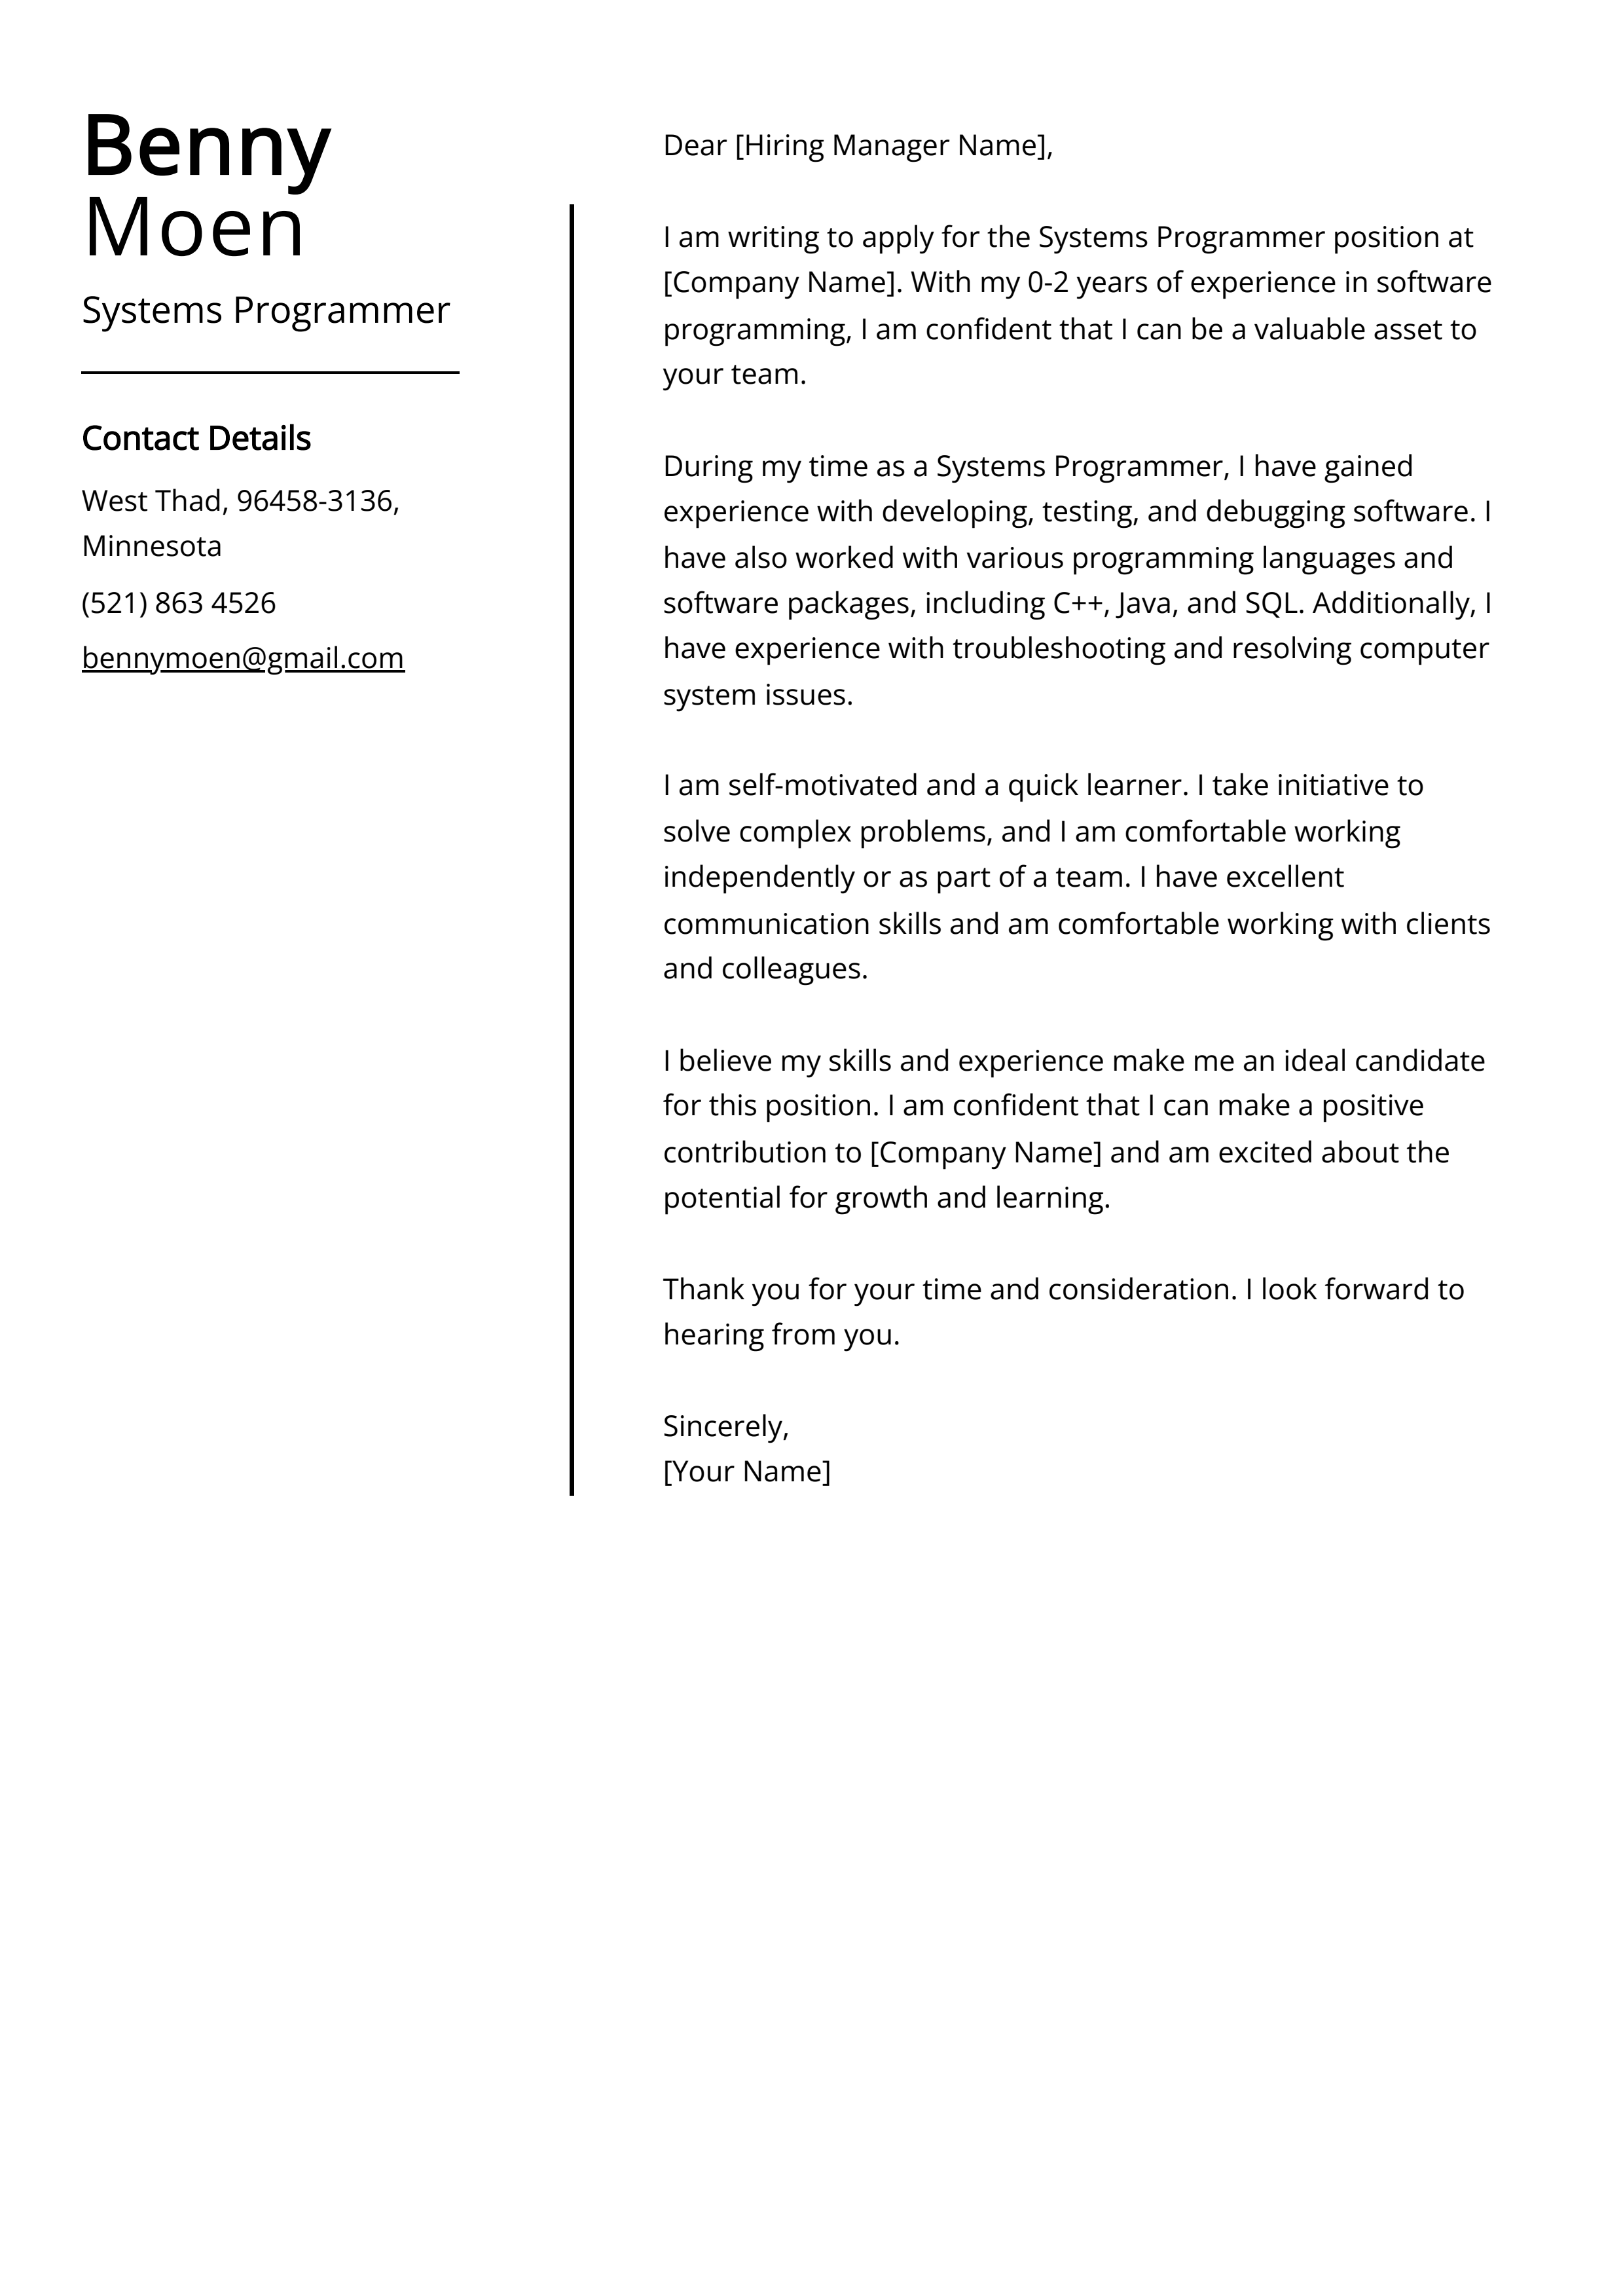 Systems Programmer Cover Letter Example